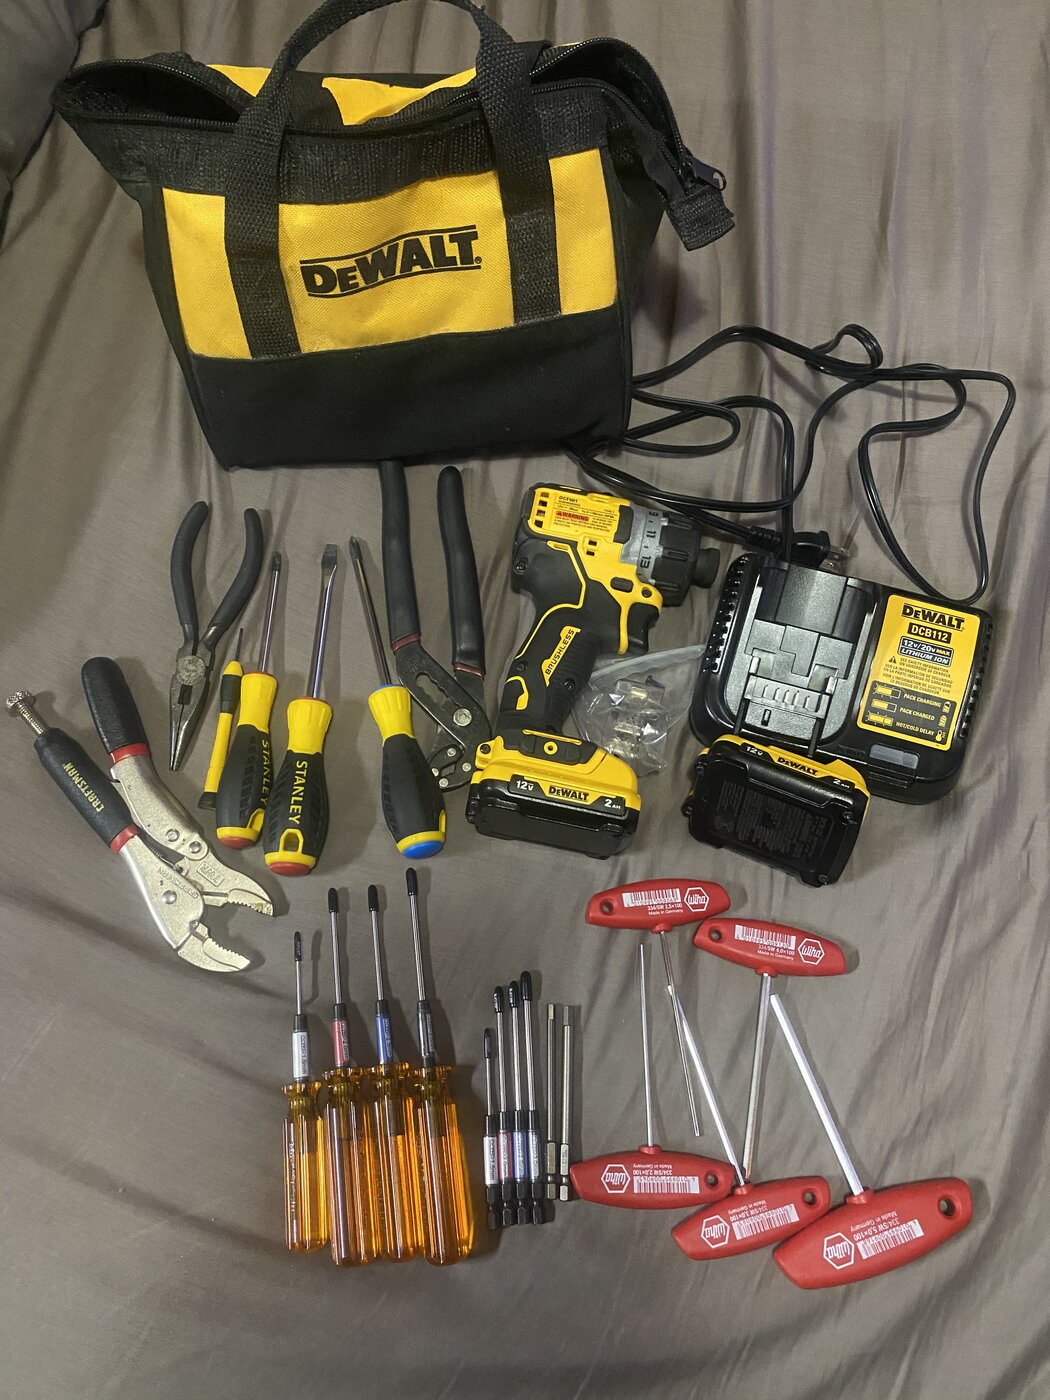 SOLD / FOUND - Tool kit (DeWalt Drill, MIP Hex Bits and drivers, Wiha  T-Handles, plus craftsman needle nose, vice grips, channel locks)